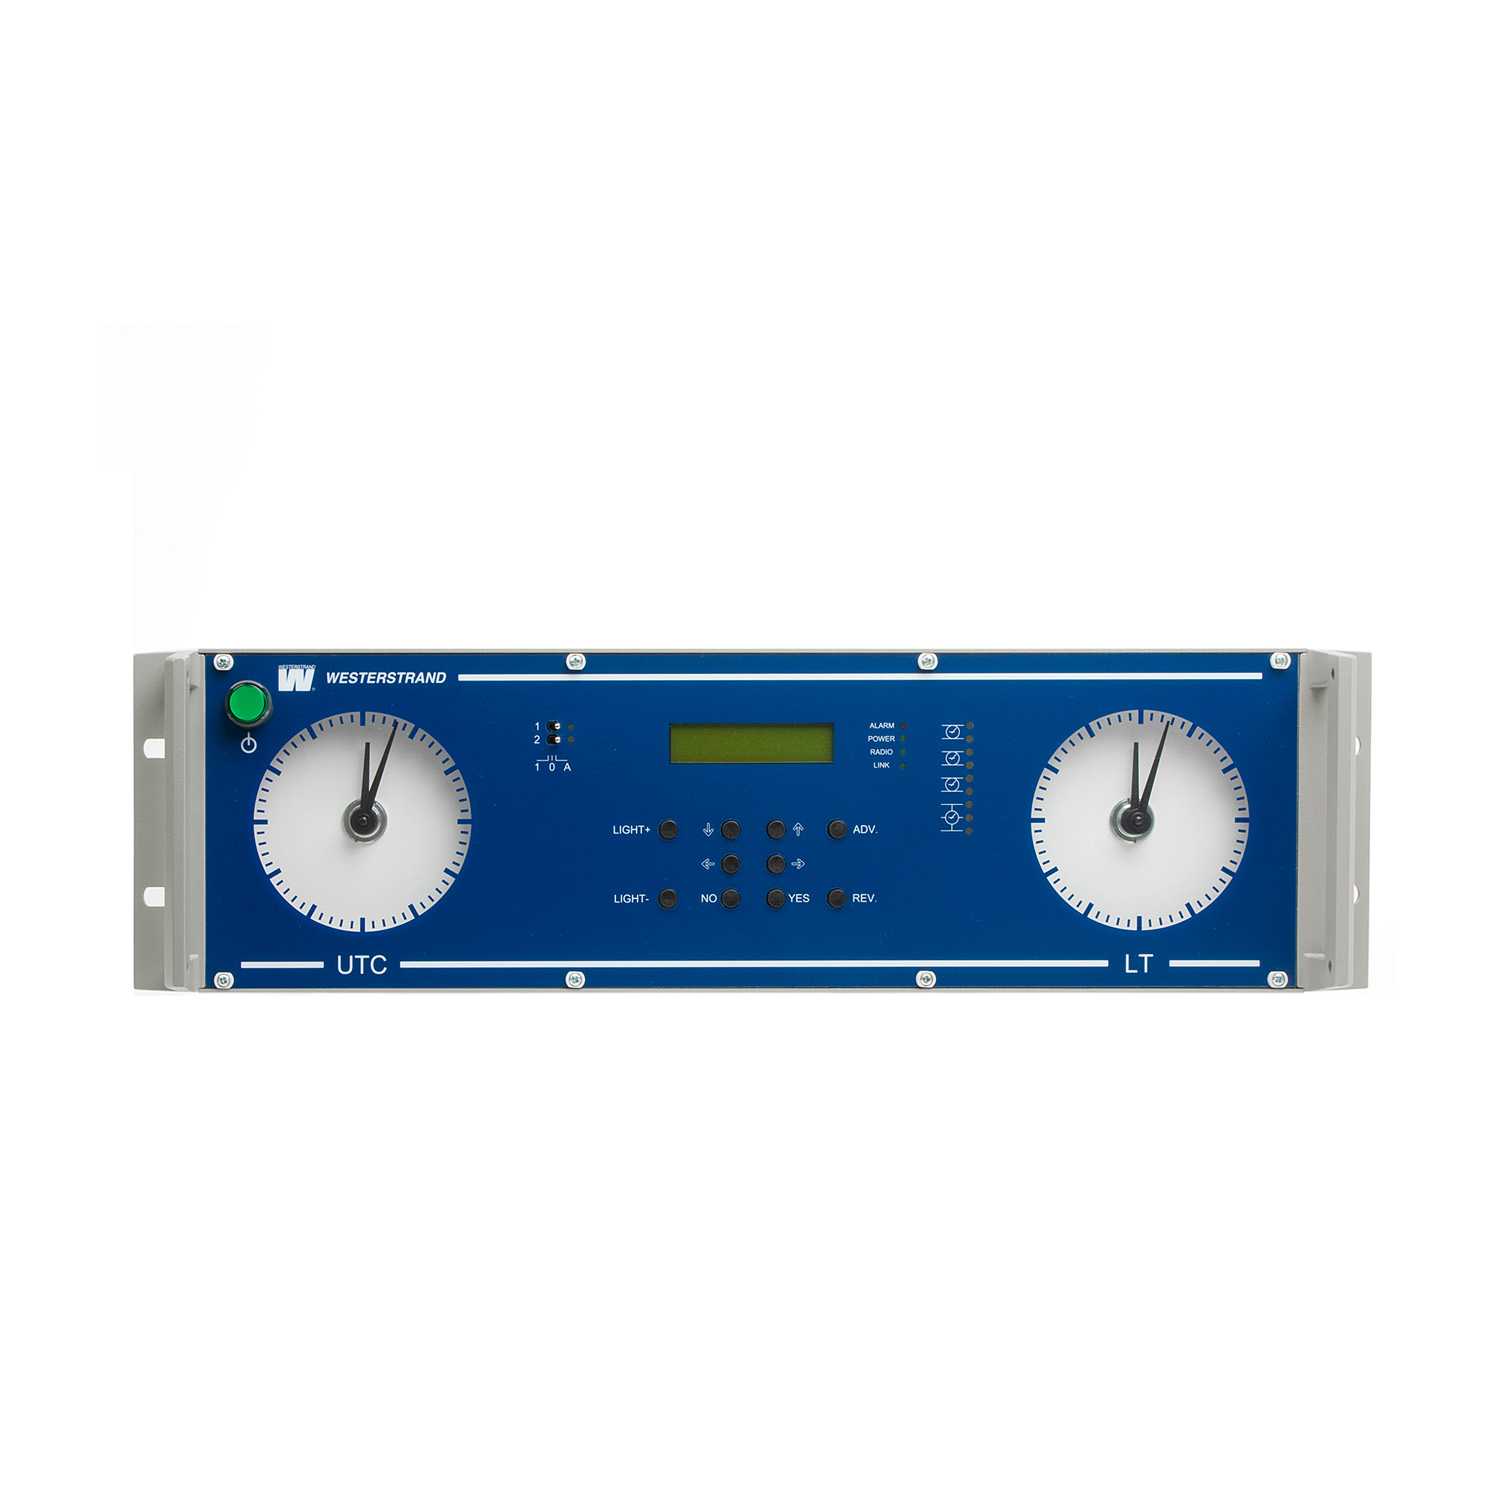 3005050029 70000L Marine master clock with network time server